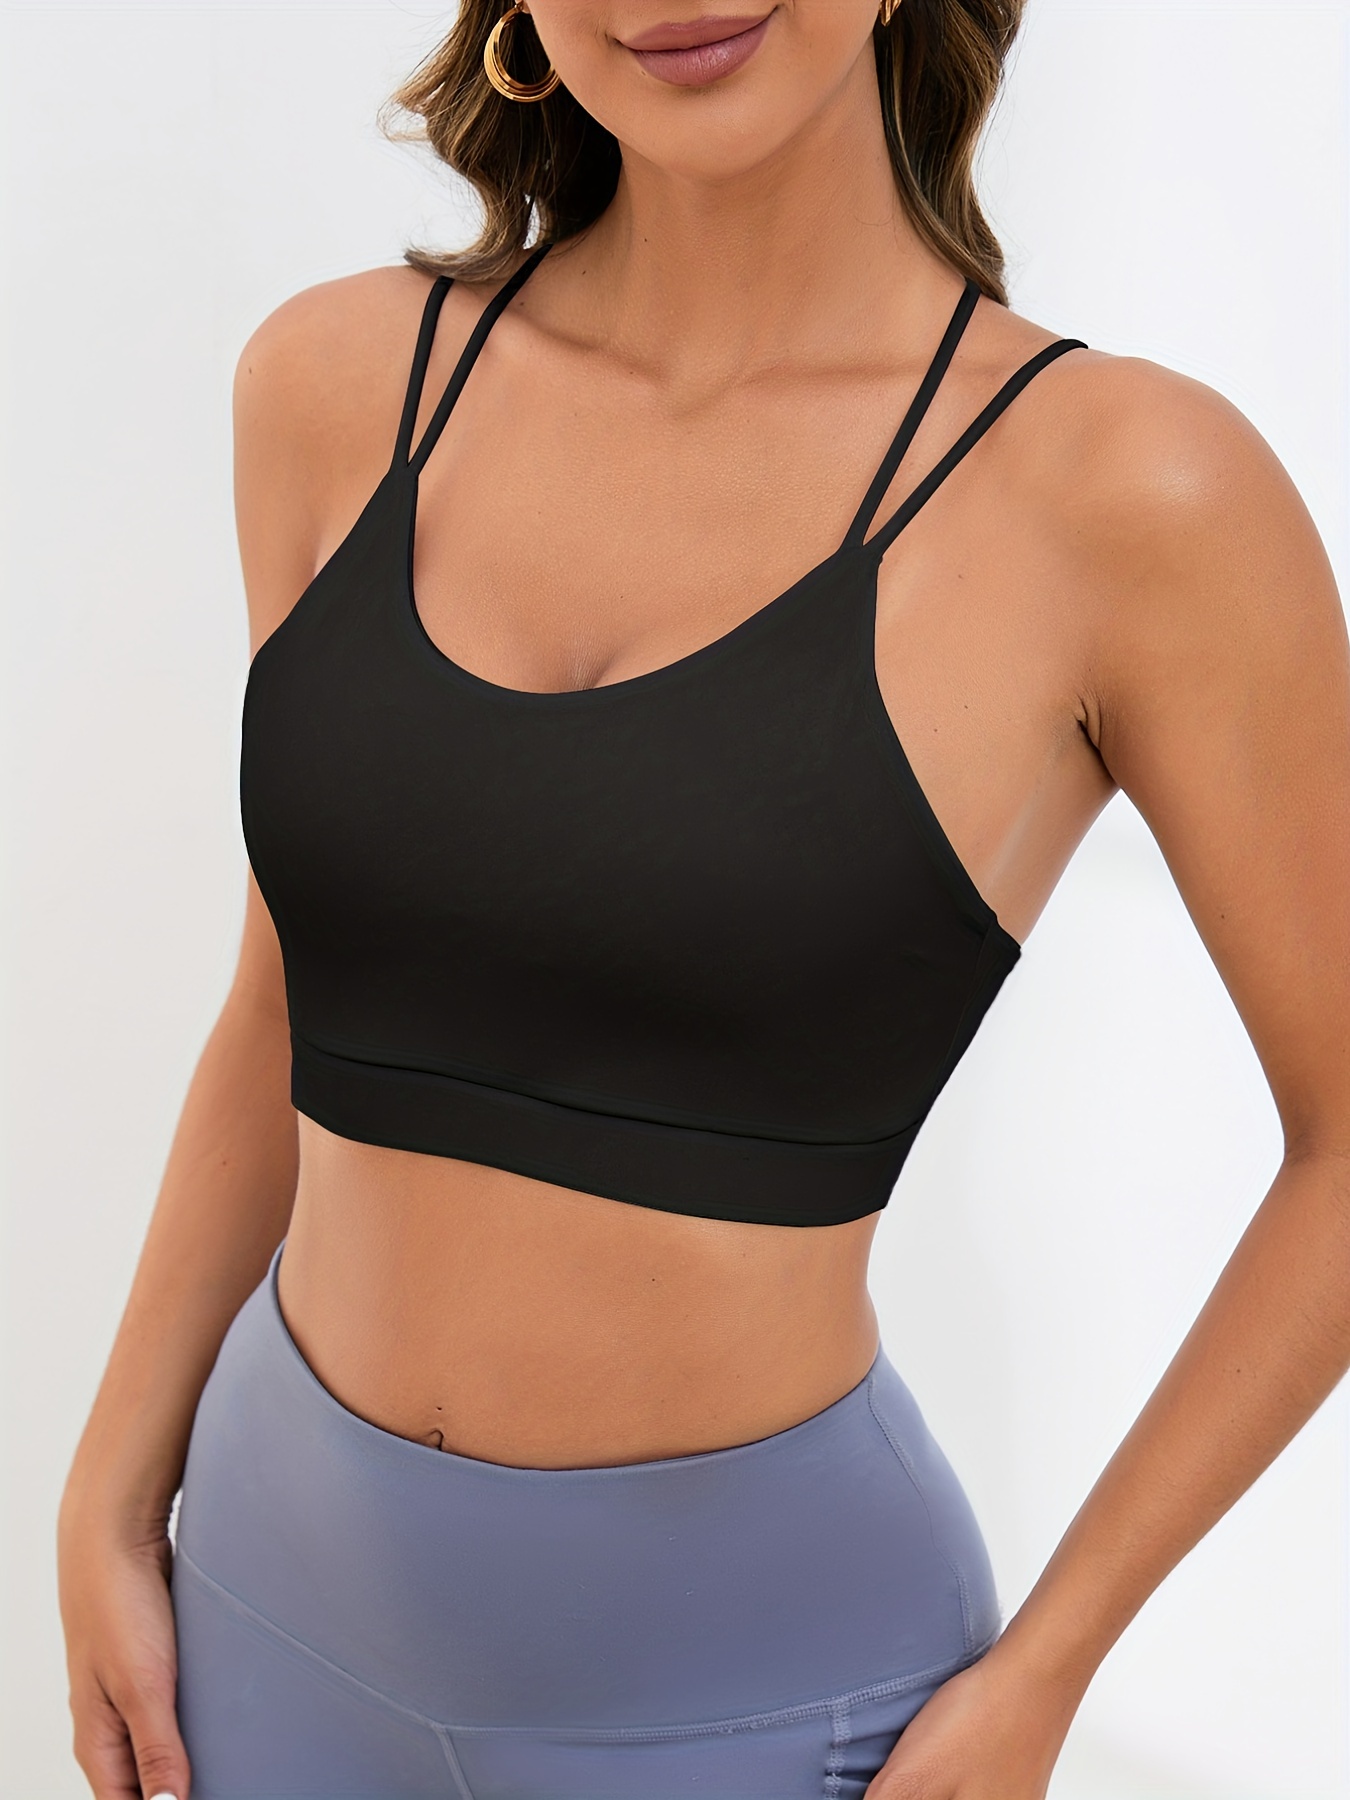 Square Neck Backless Spaghetti Straps Sports Bras for Women Padded